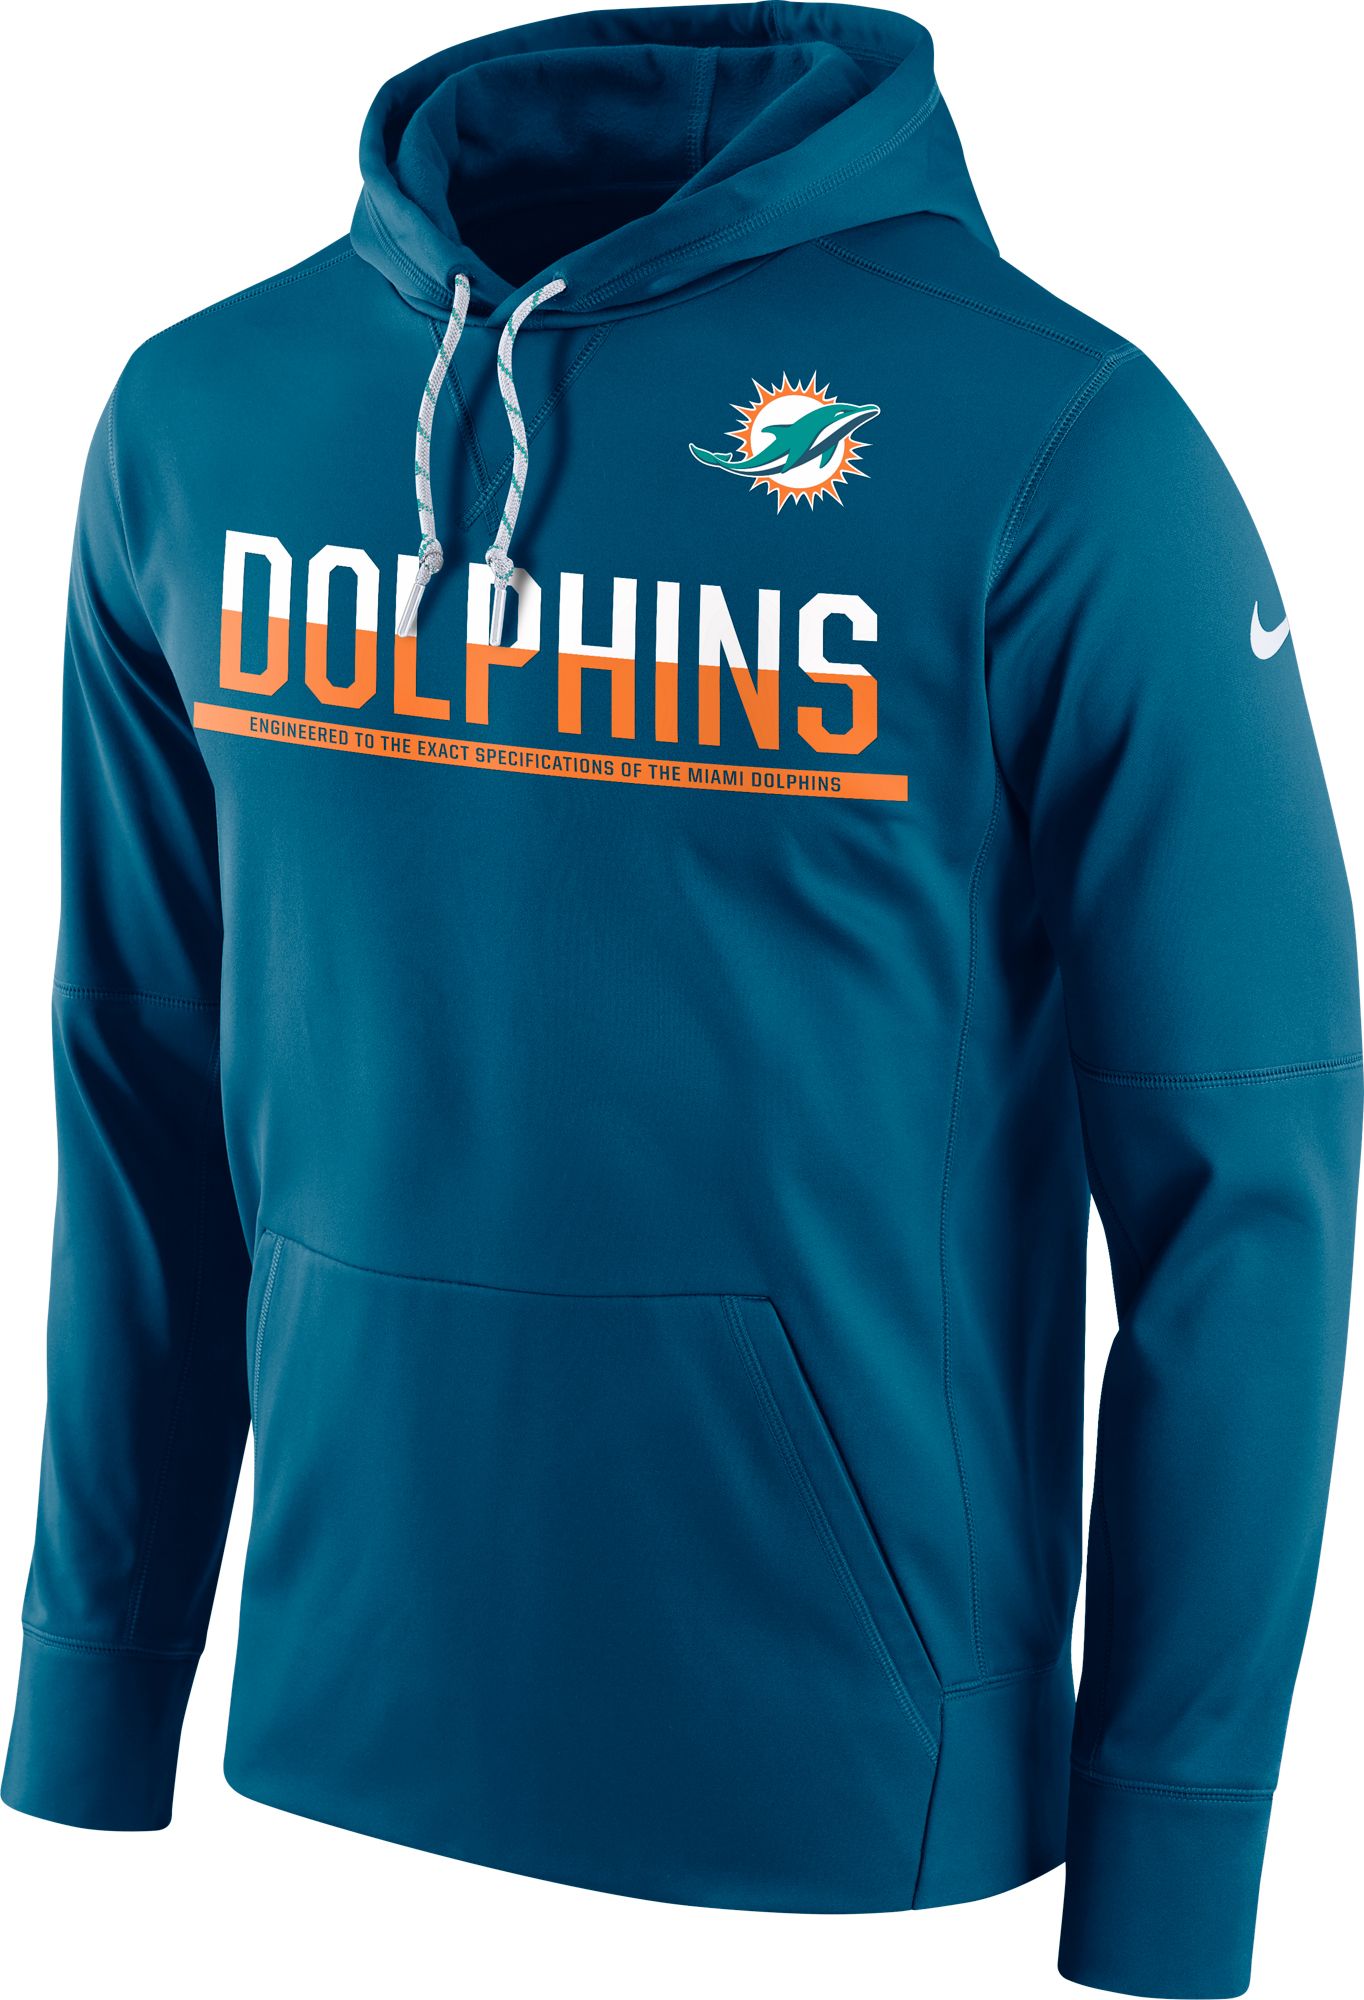 Miami Dolphins Apparel & Gear | DICK'S Sporting Goods